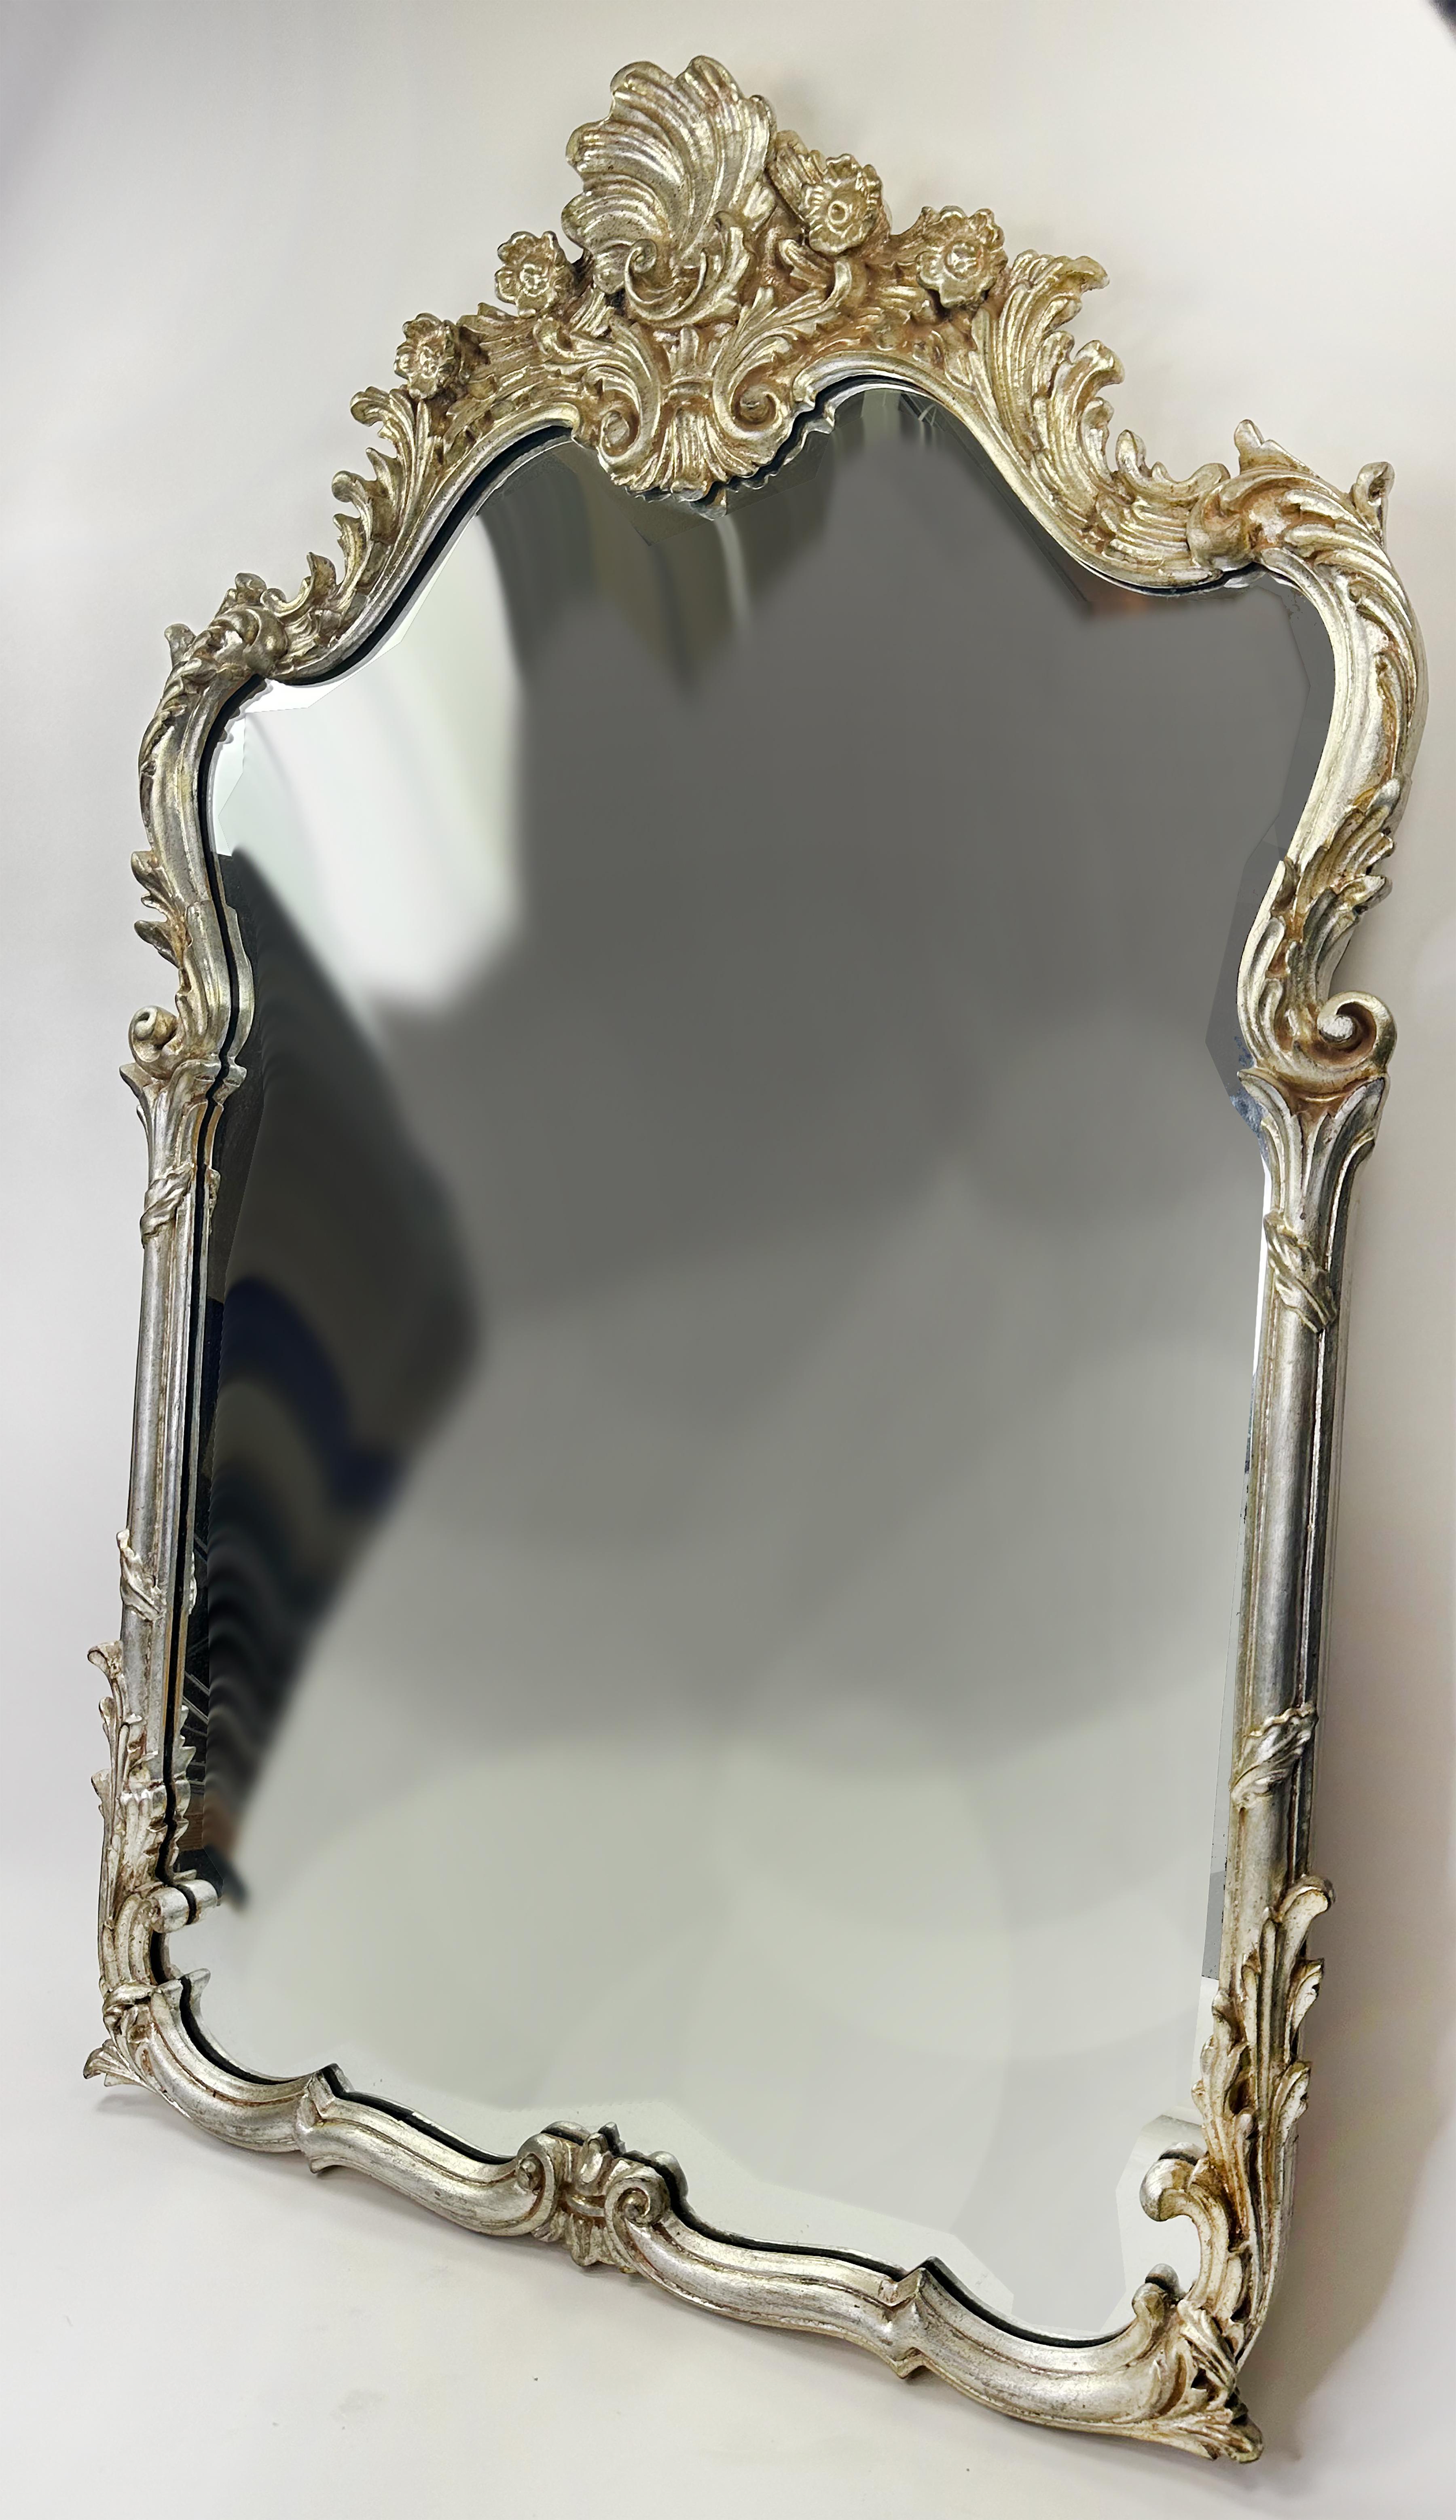 A handsome and stylish vintage Italian Baroque style mirror. Expertly hand-applied and glazed silver aluminum leaf on a wood frame hand carved by Italian artisans. The top of the mirror is ornate with floral organic shapes. The organic shapes